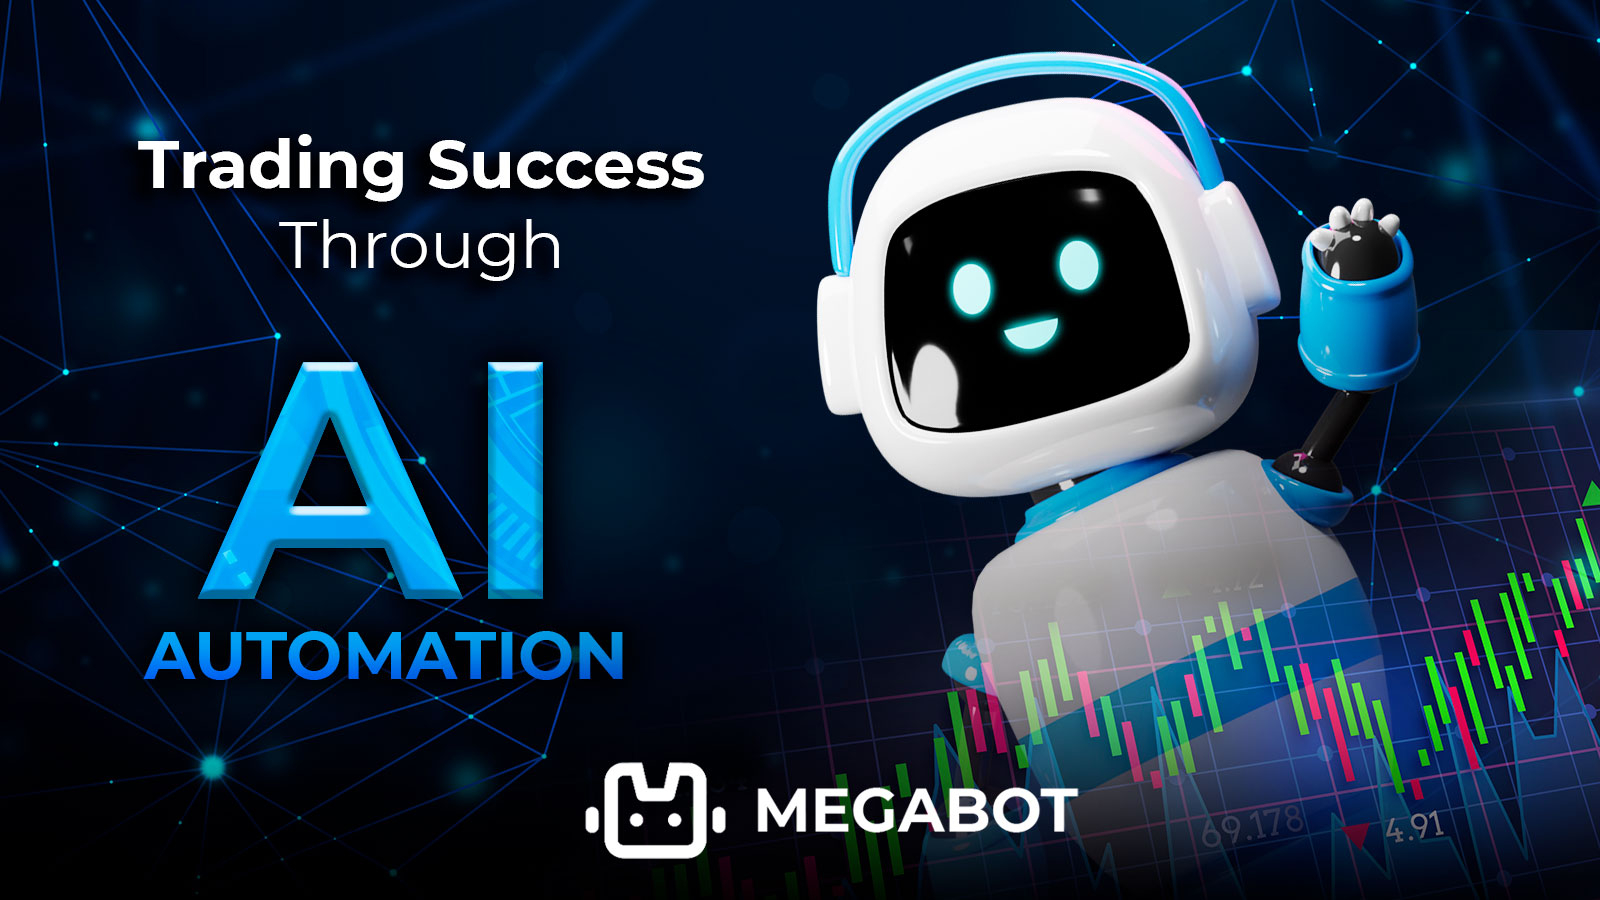 Megabot: The First AI Trading Bot Is Coming Soon